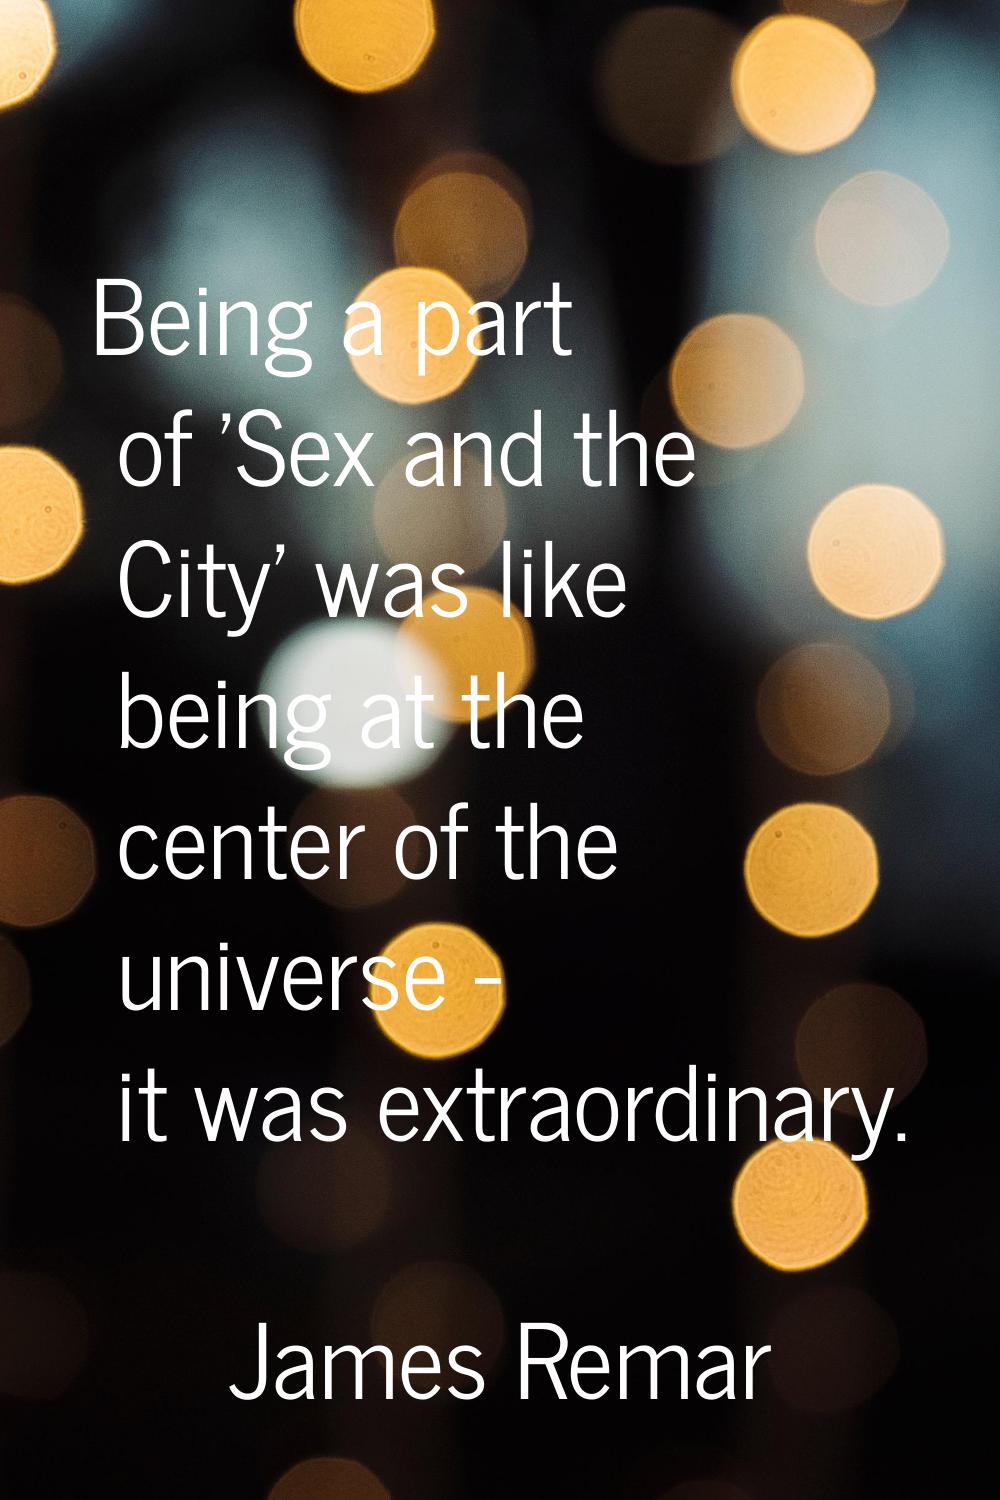 Being a part of 'Sex and the City' was like being at the center of the universe - it was extraordin